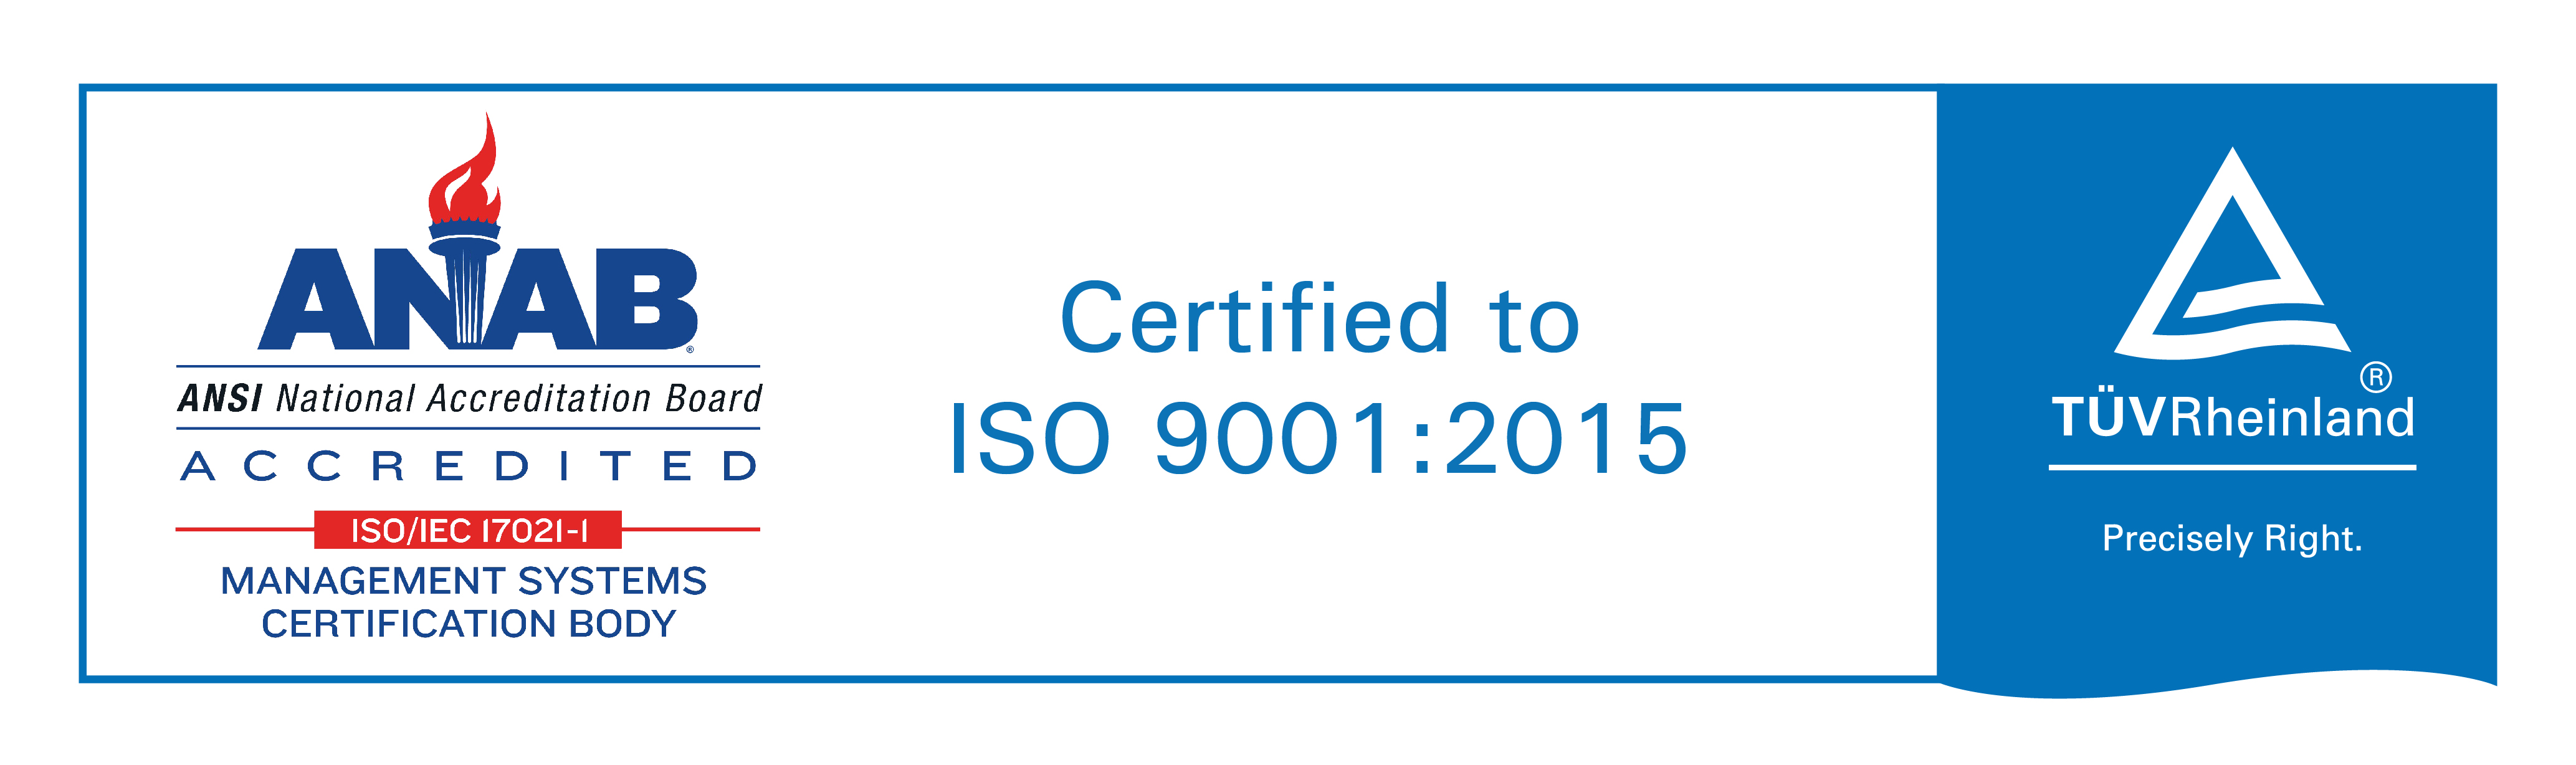 ANAB badge, image text: Certified to ISO 9001:2015